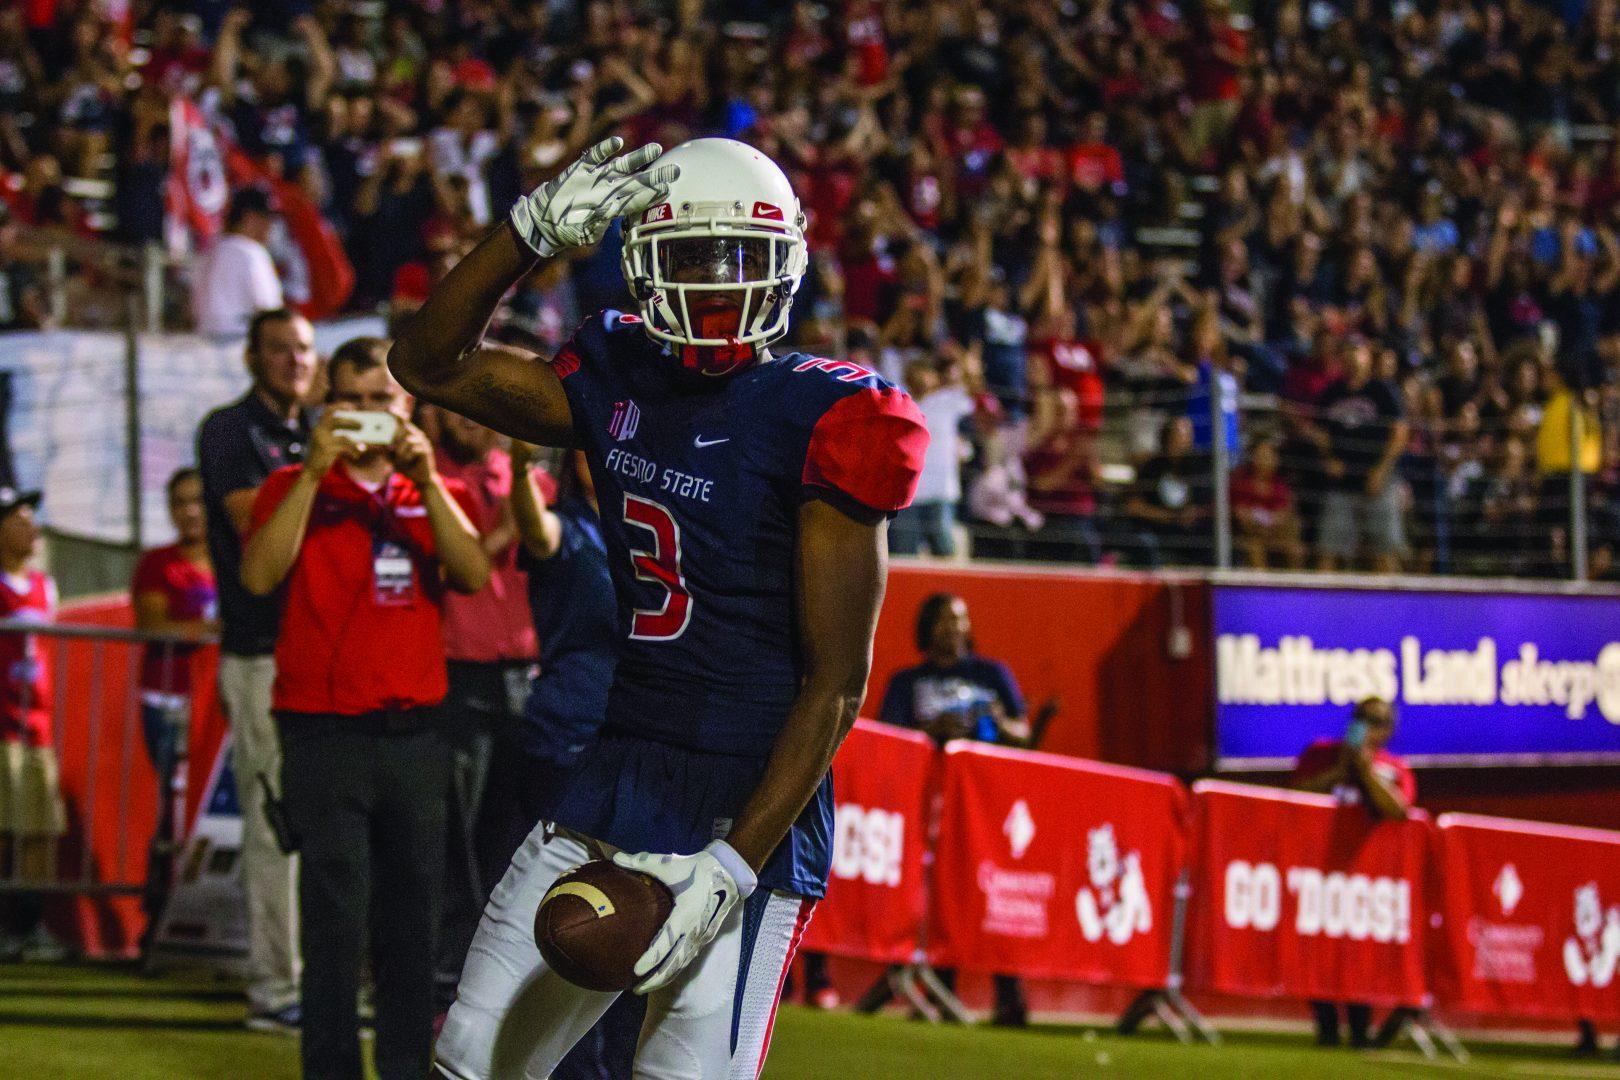 KeeSean+Johnson+%28%233%29+celebrates+after+catching+a+touchdown+pass+in+Fresno+States+victory+against+Sacramento+State+on+Saturday%2C+Sept.+10%2C+2016+at+Bulldog+Stadium.+%28Khone+Saysamongdy%2FThe+Collegian%29